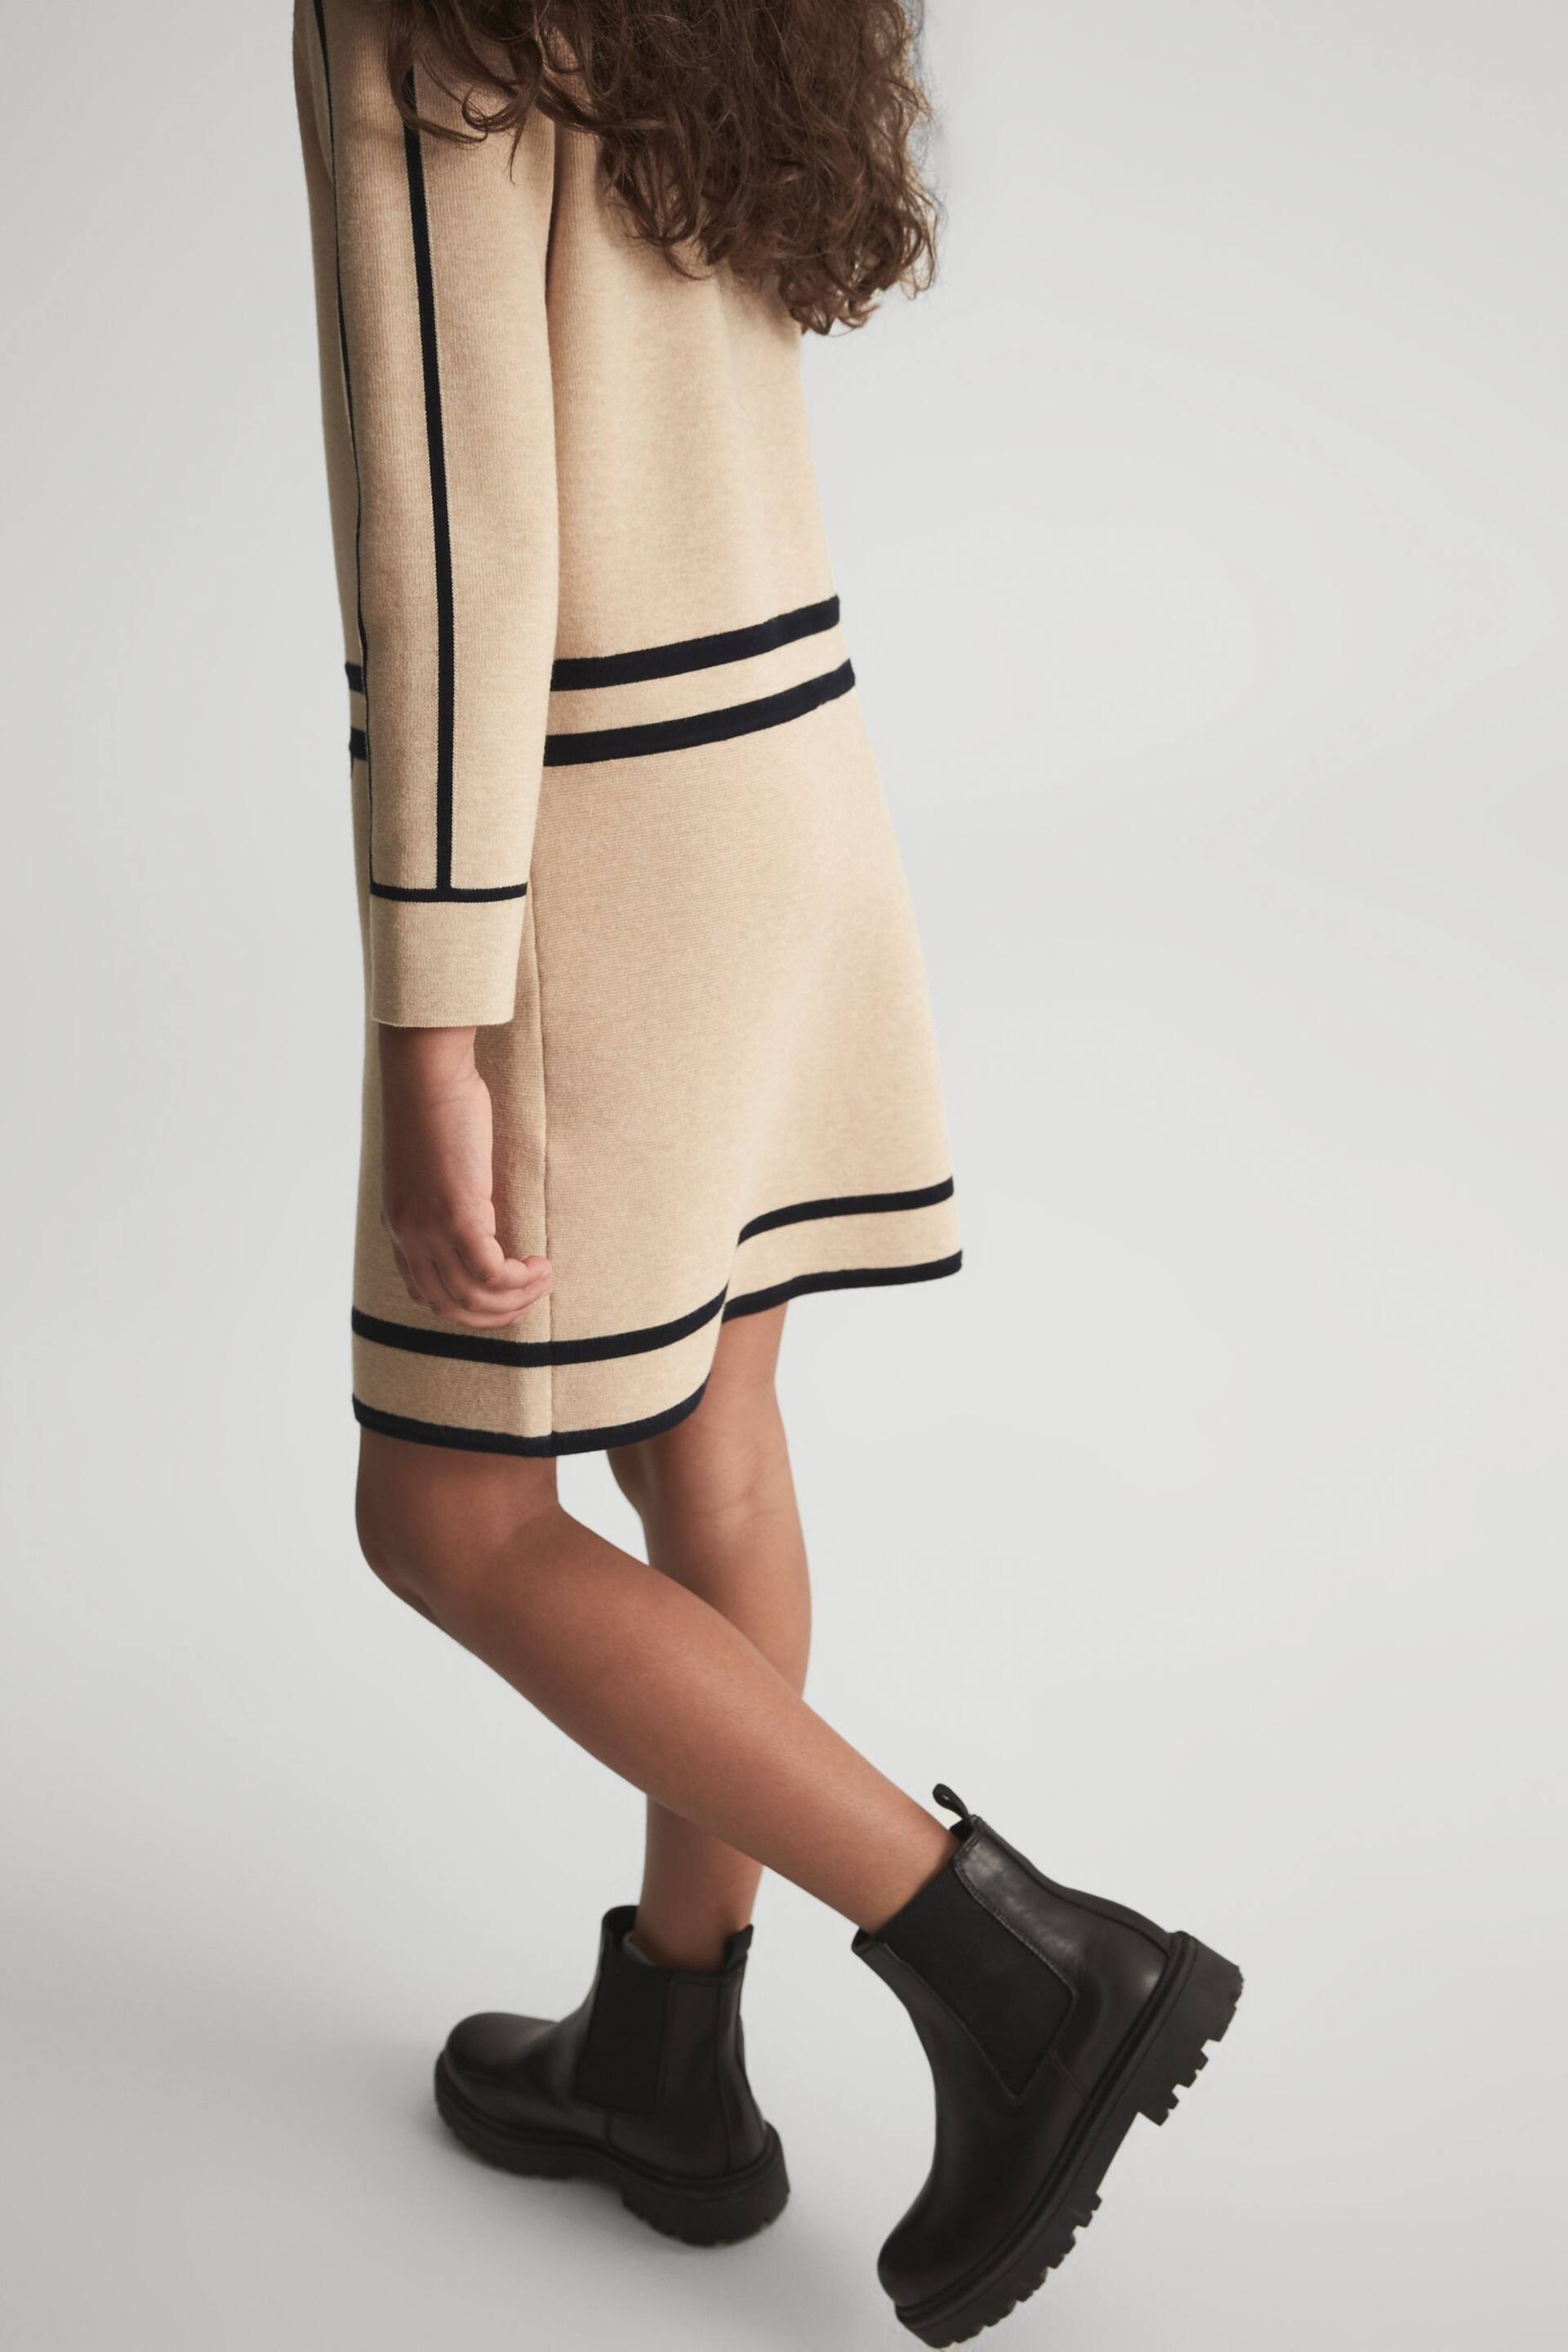 Reiss Camel Layla Junior Knitted Mini Dress - Image 4 of 5